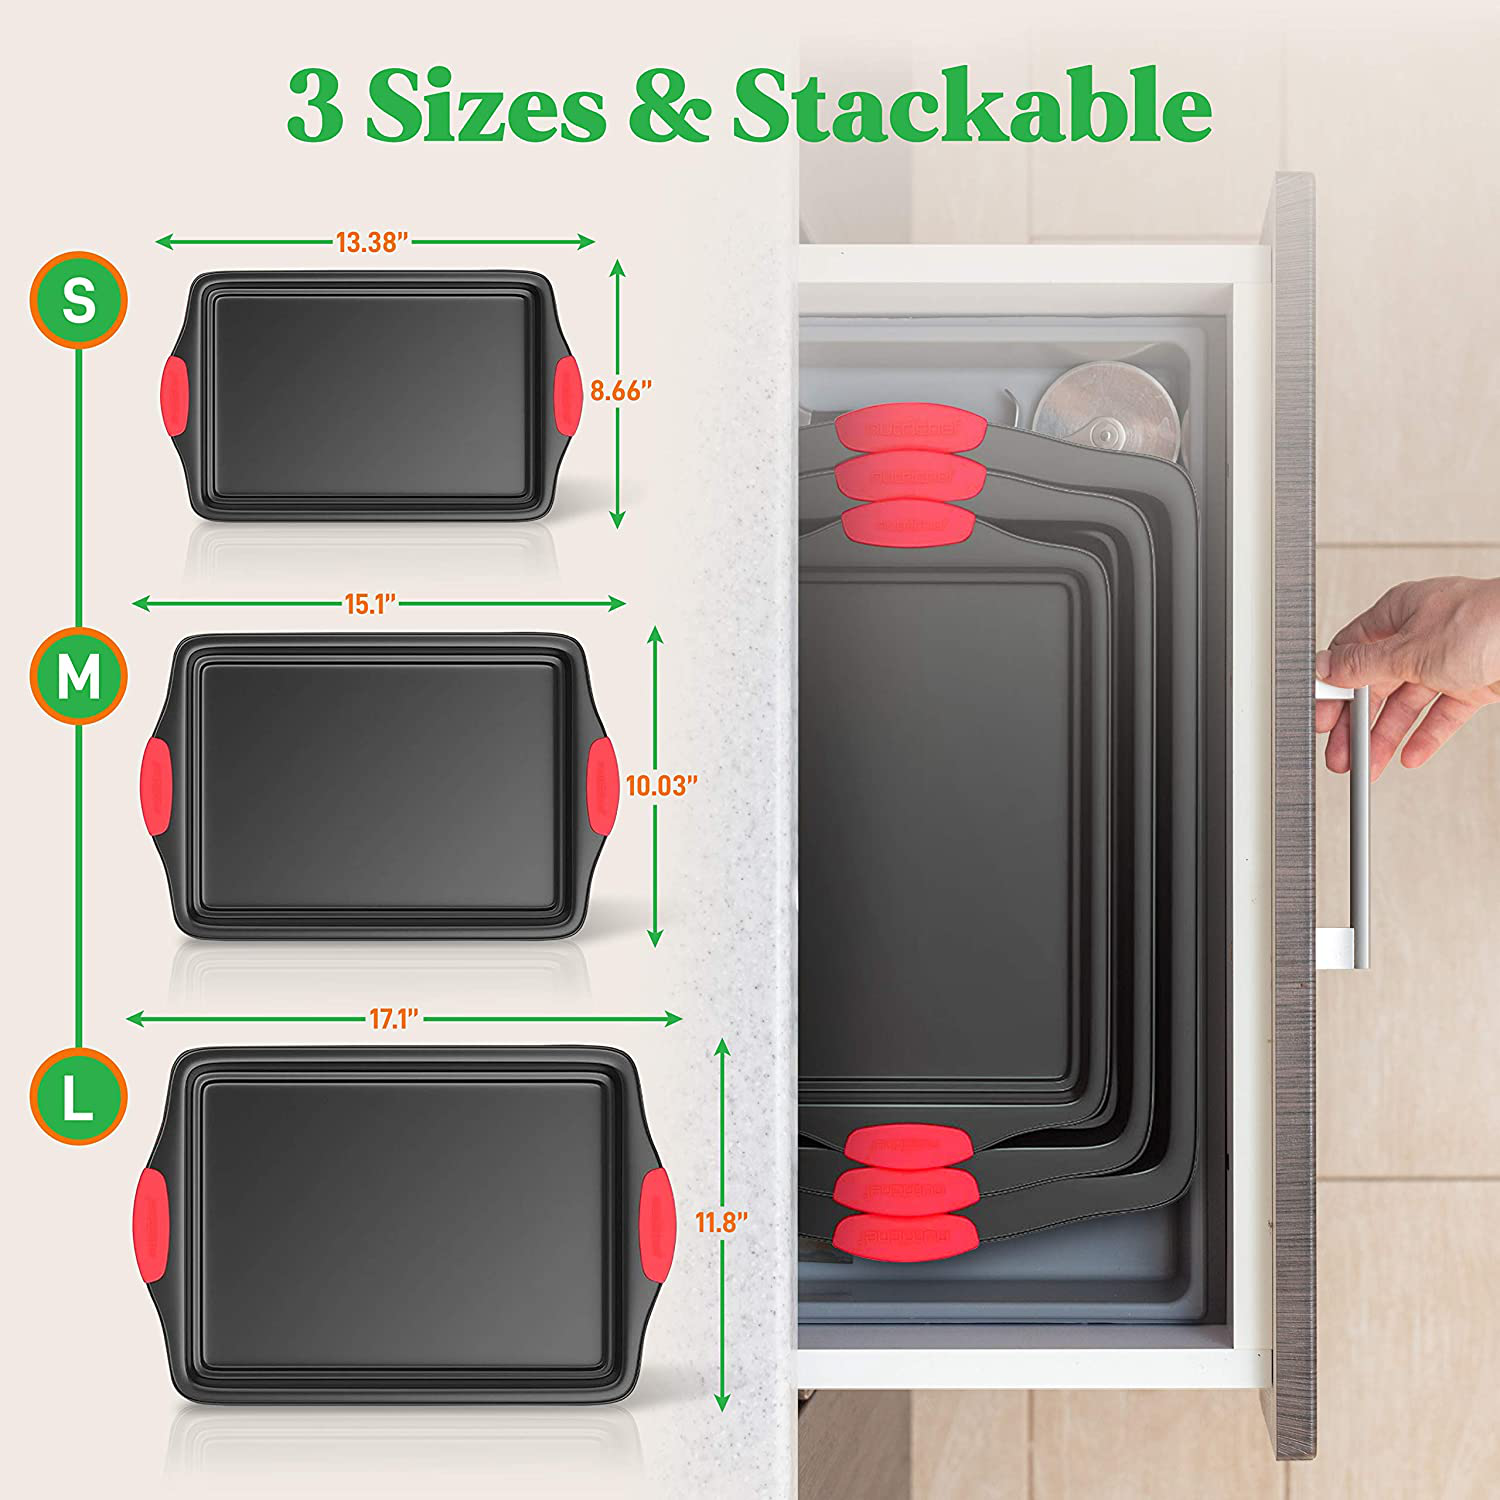 Nutrichef 10-Piece Carbon Steel Nonstick Bakeware Baking Tray Set w/Heat Red Silicone Handles, Oven Safe, Cookie Sheet